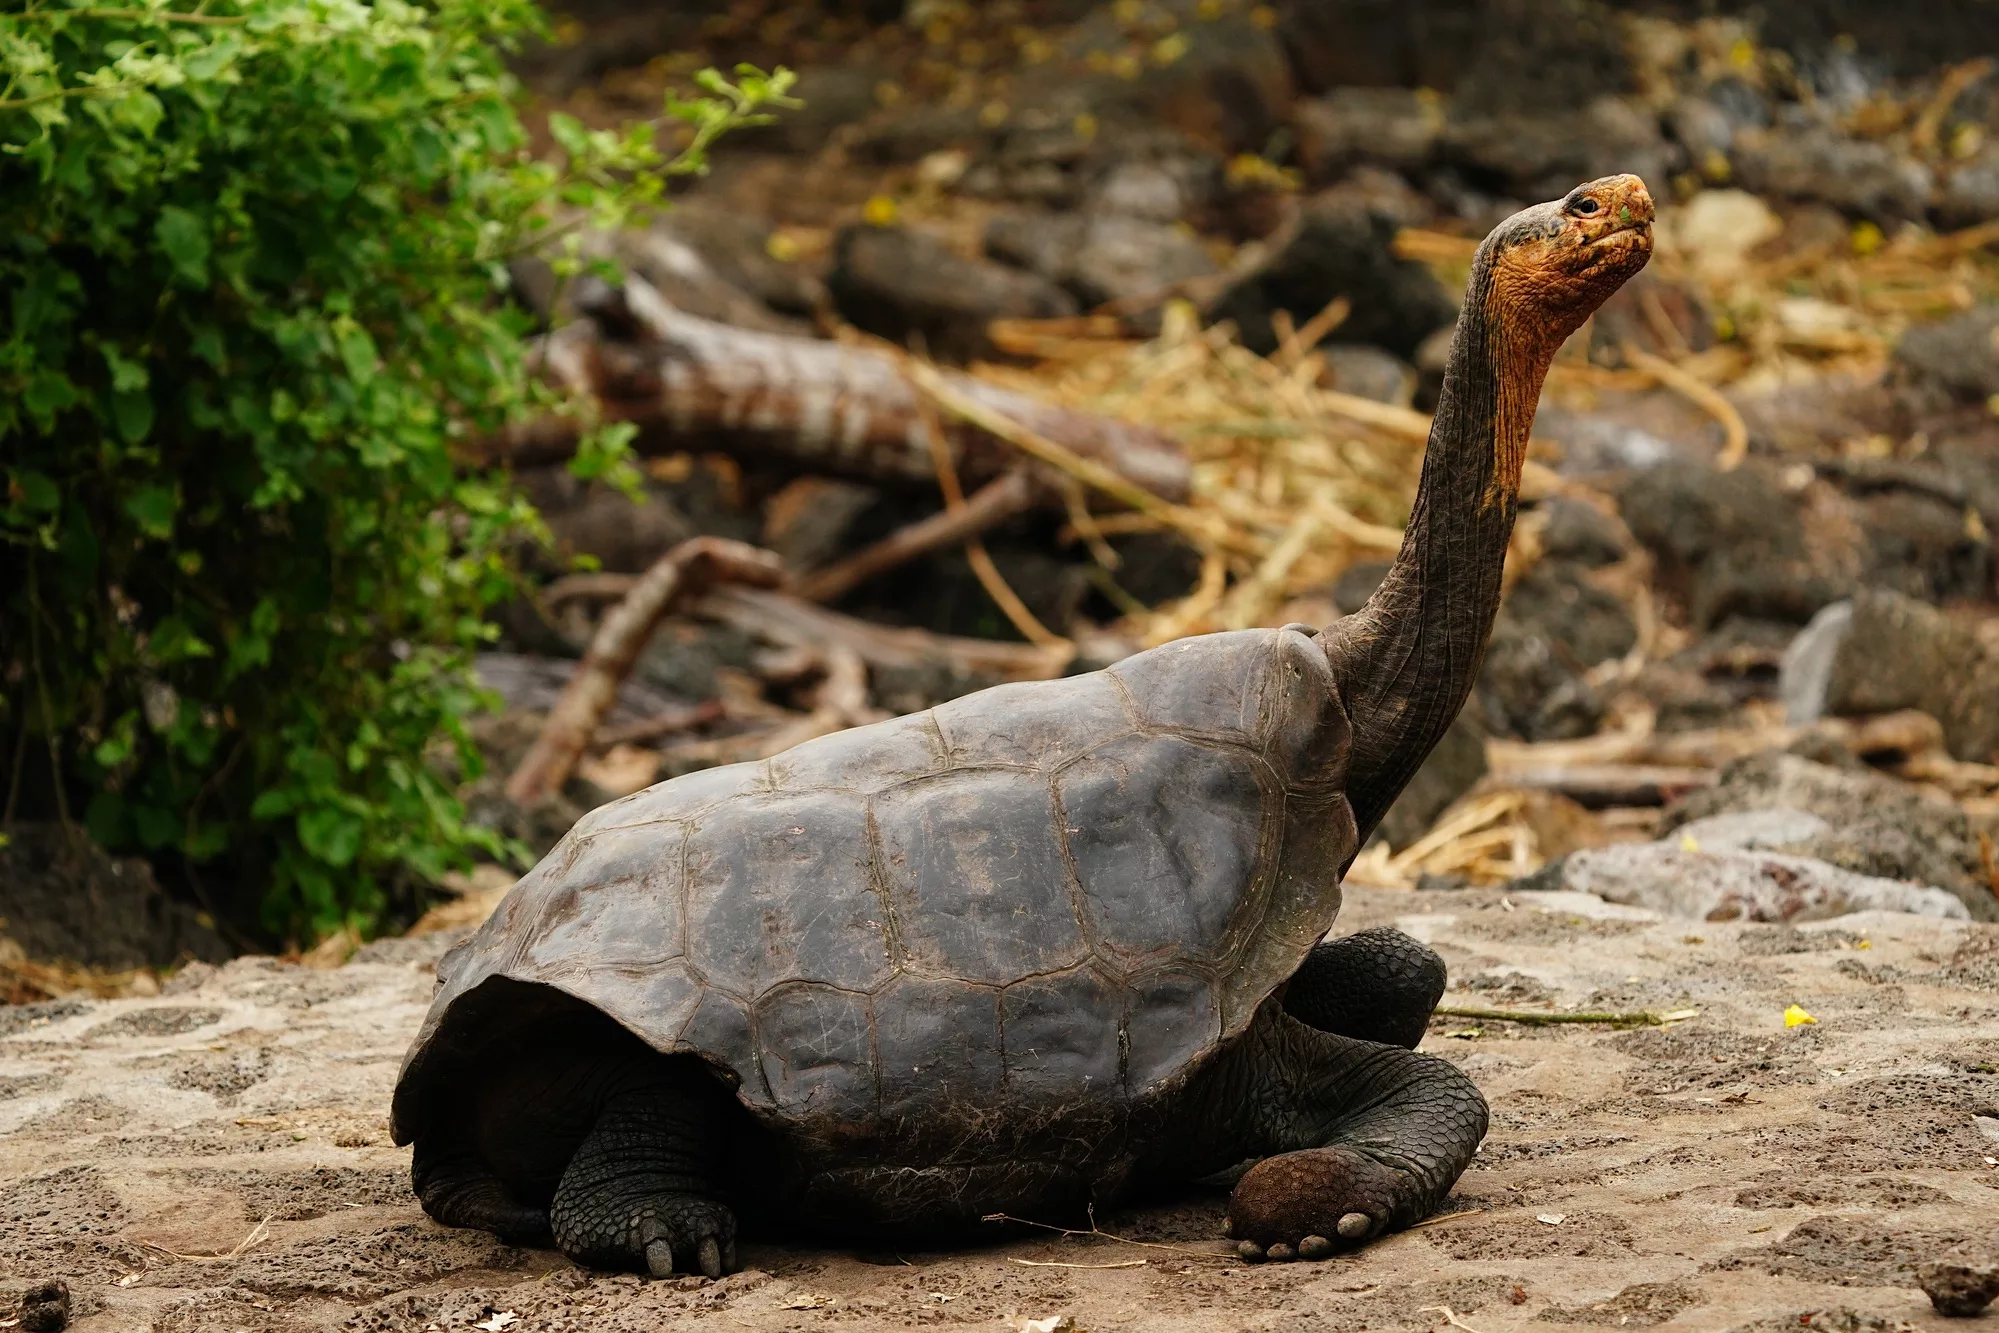 Galapagos Islands Tour and Photography Experience - giant tortoise